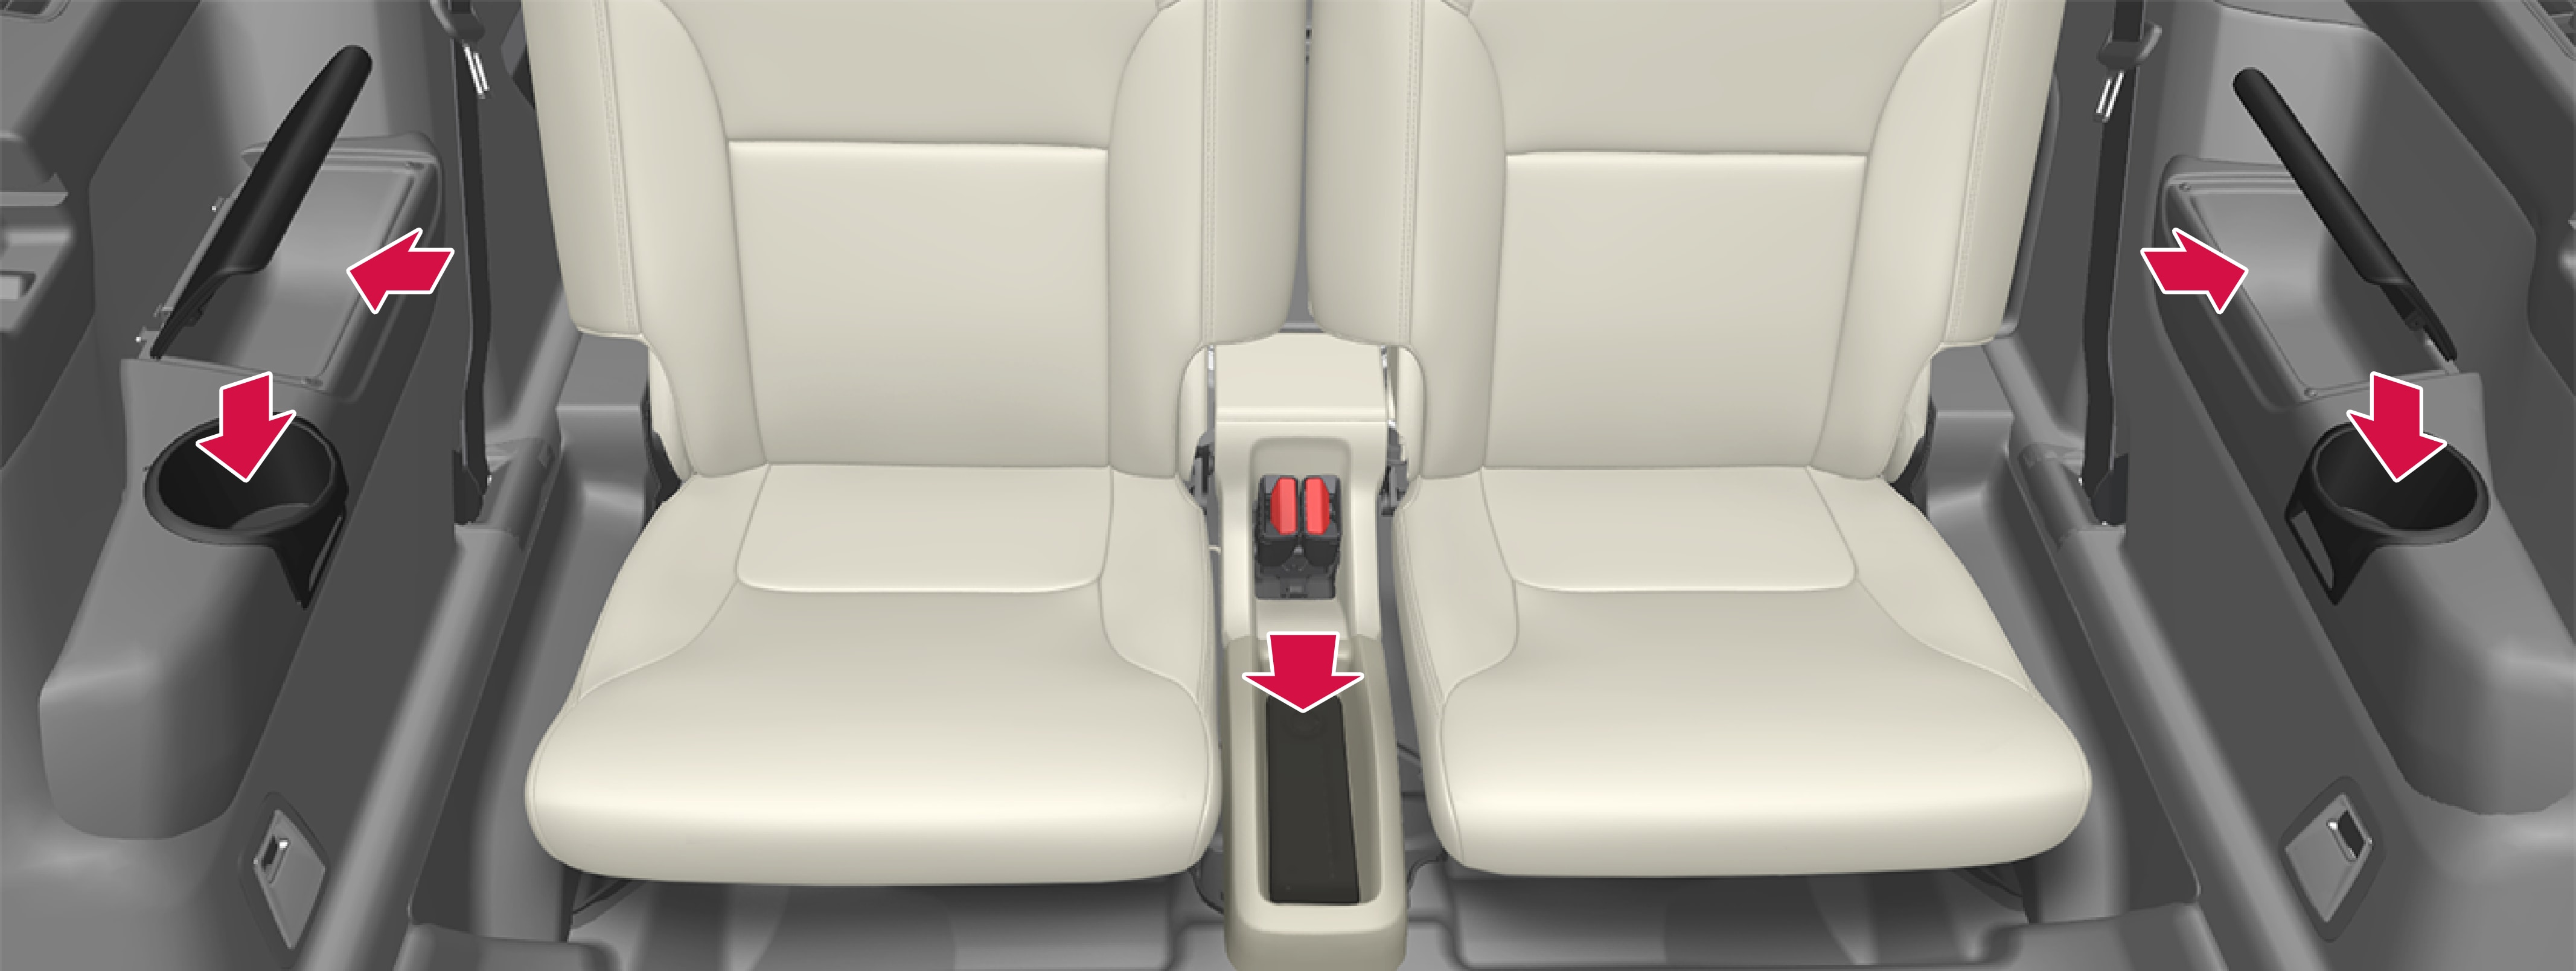 P5-1507–Interior–Overview 3rd seat row side